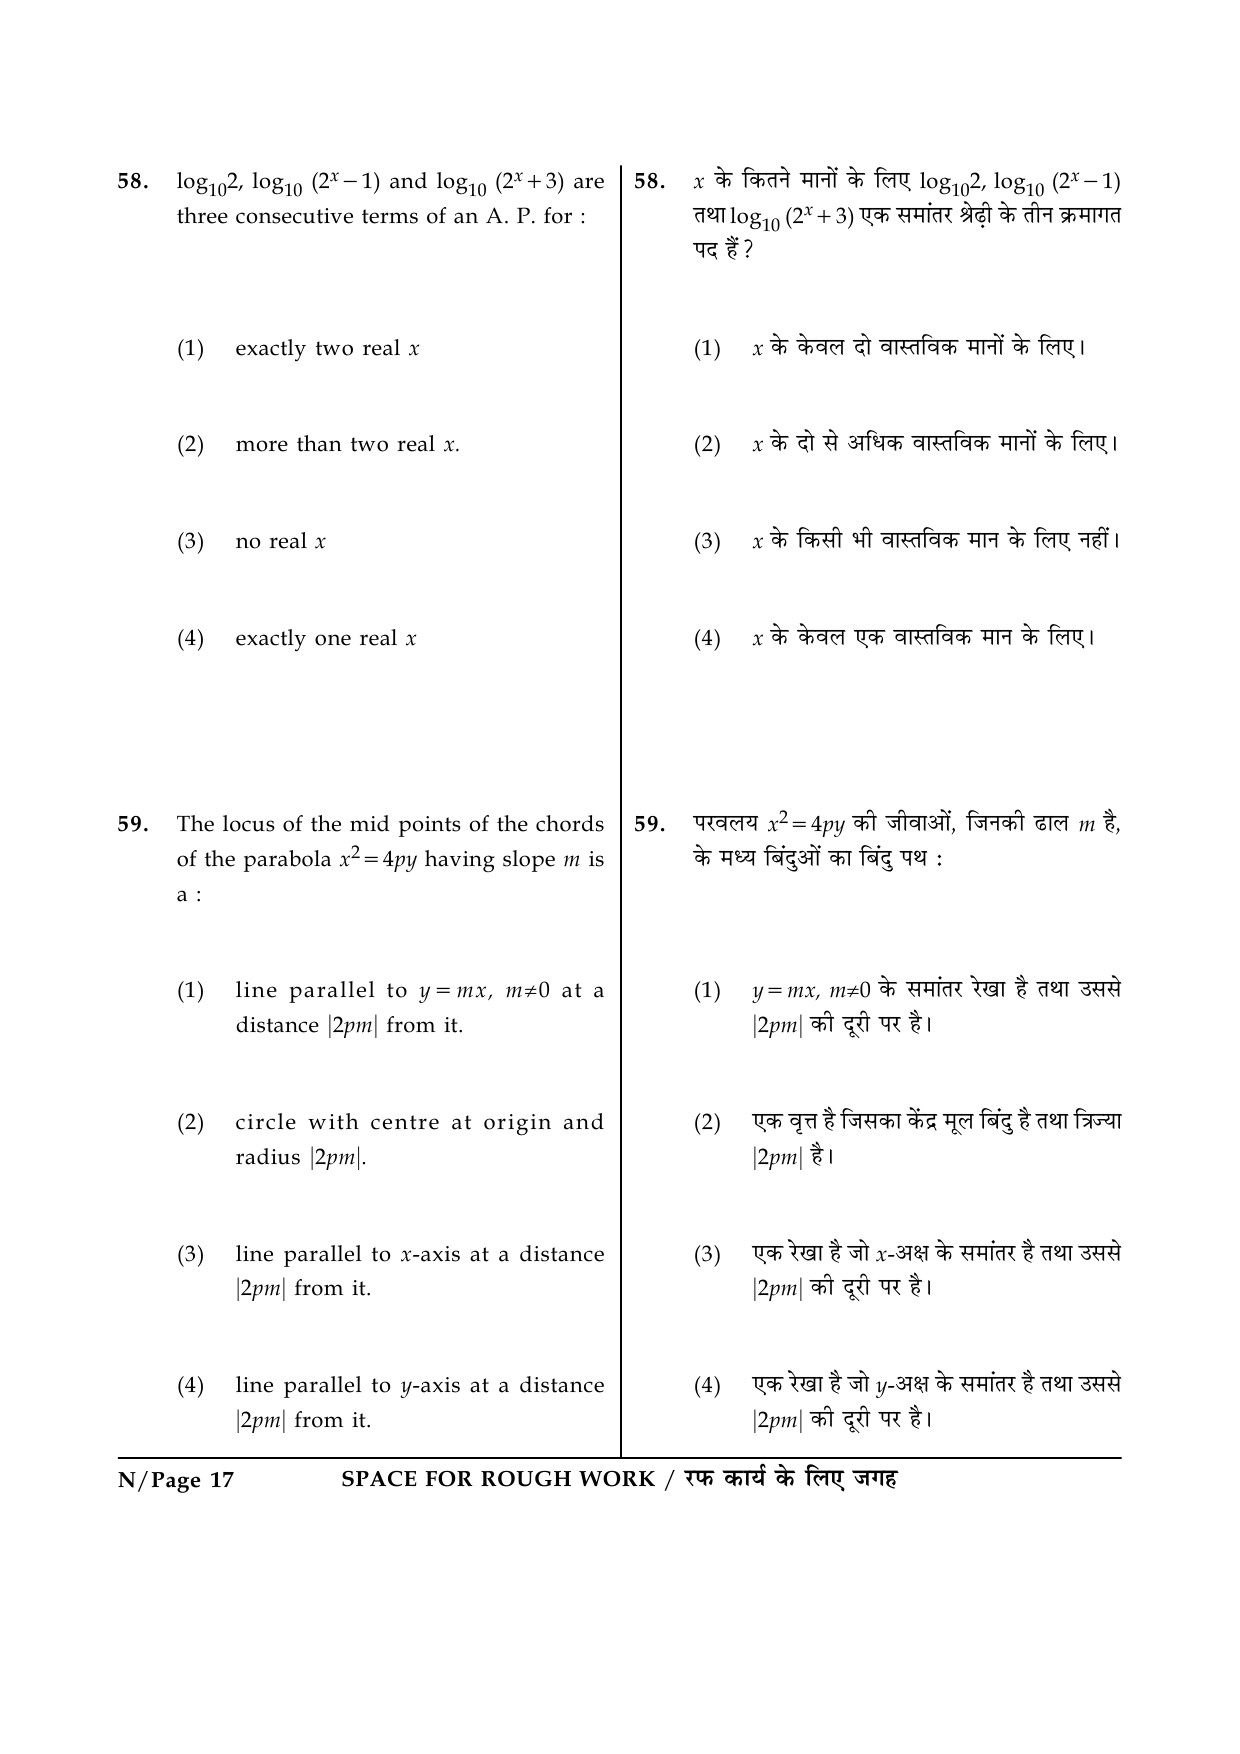 JEE Main Exam Question Paper 2015 Booklet N 17